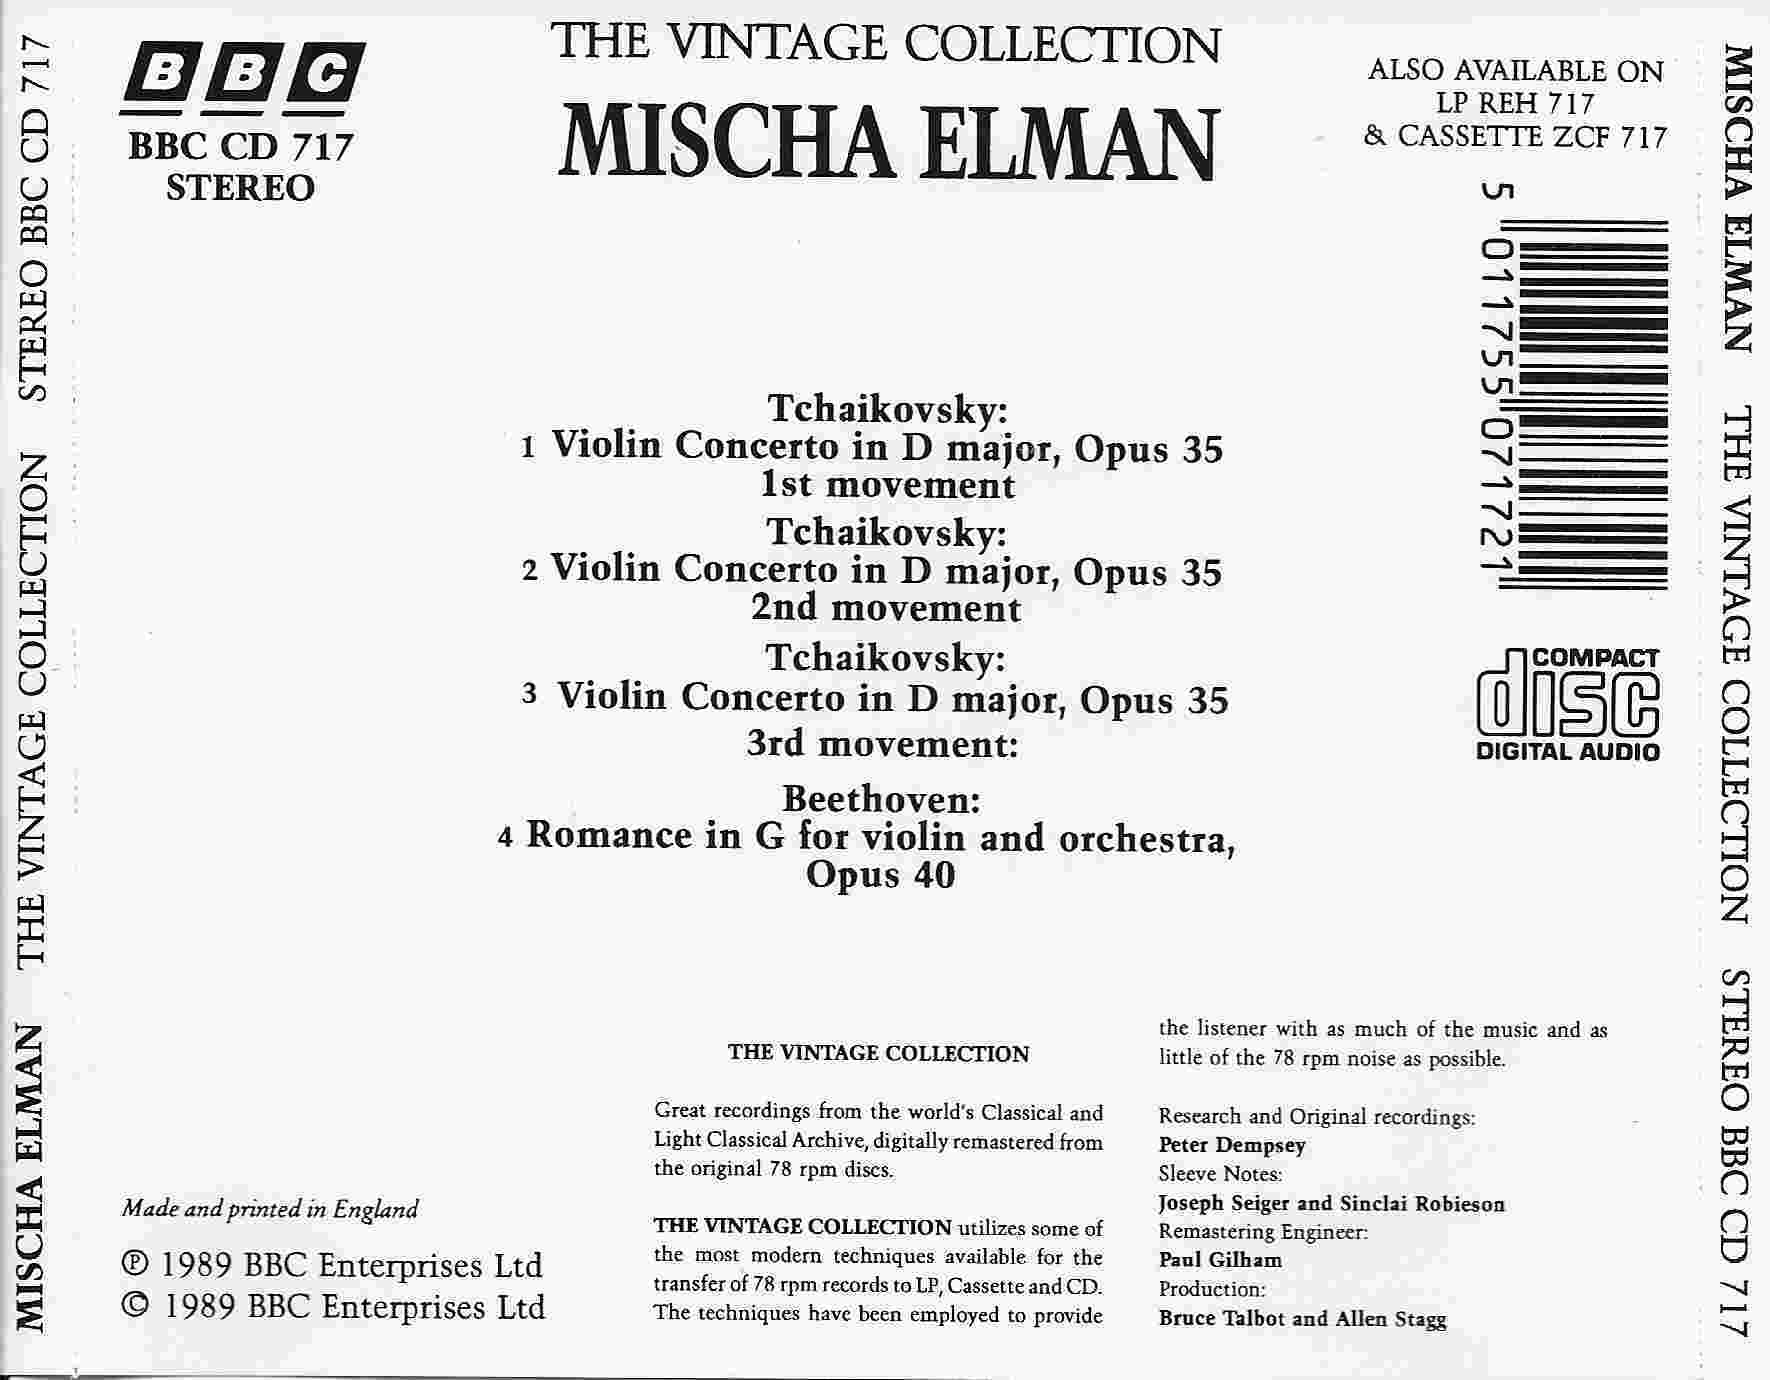 Picture of BBCCD717 The vintage collection - Mischa Elman by artist Tchaikovsky / Beethoven / Mischa Elman with orchestra from the BBC records and Tapes library